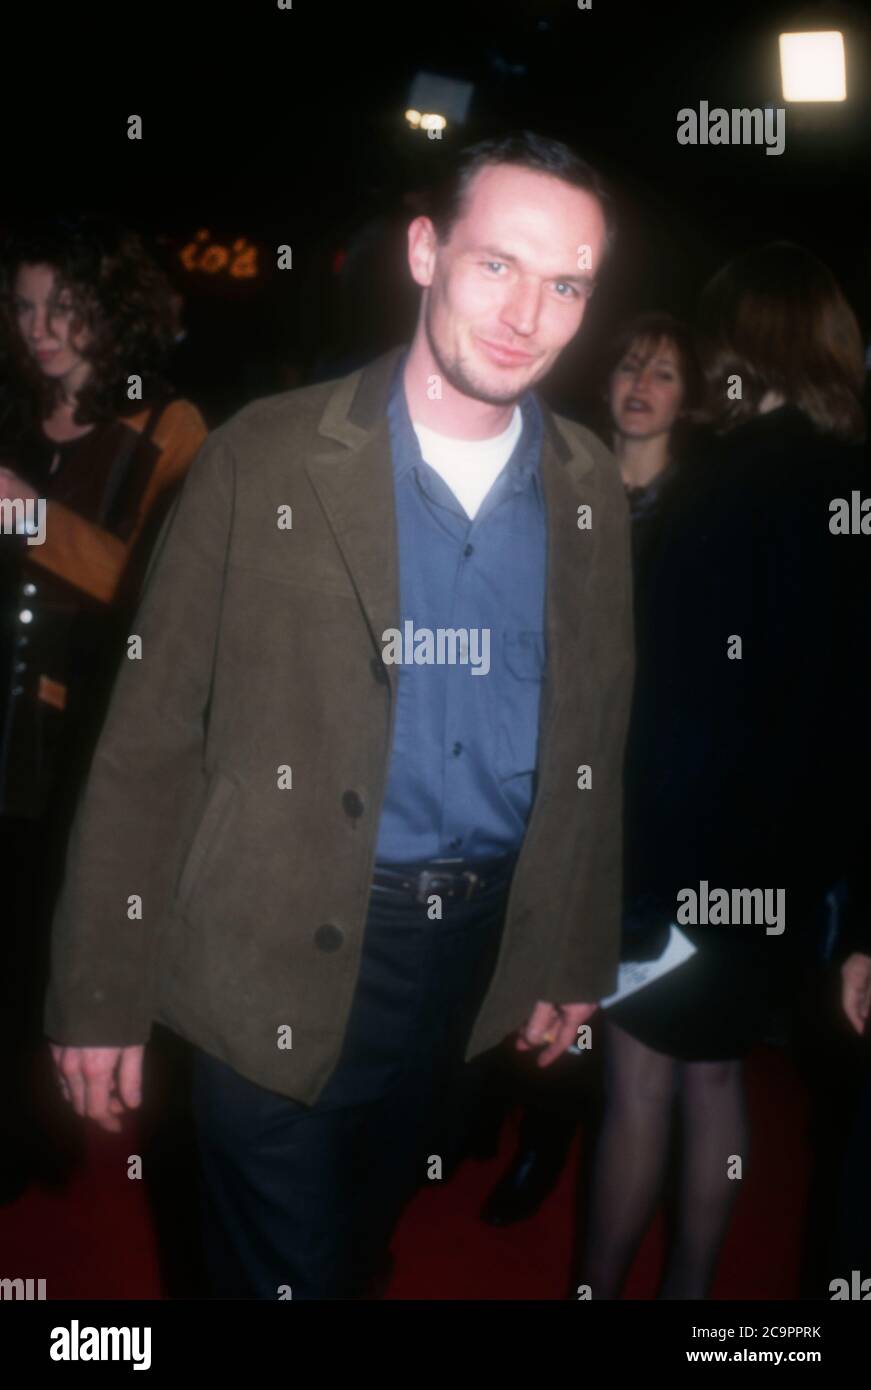 Westwood, California, USA 26th February 1996 Actor Toby Huss attends 20th Century Fox' 'Down Periscope' Premiere on February 26, 1996 at Mann's Village Theatre in Westwood, California, USA. Photo by Barry King/Alamy Stock Photo Stock Photo